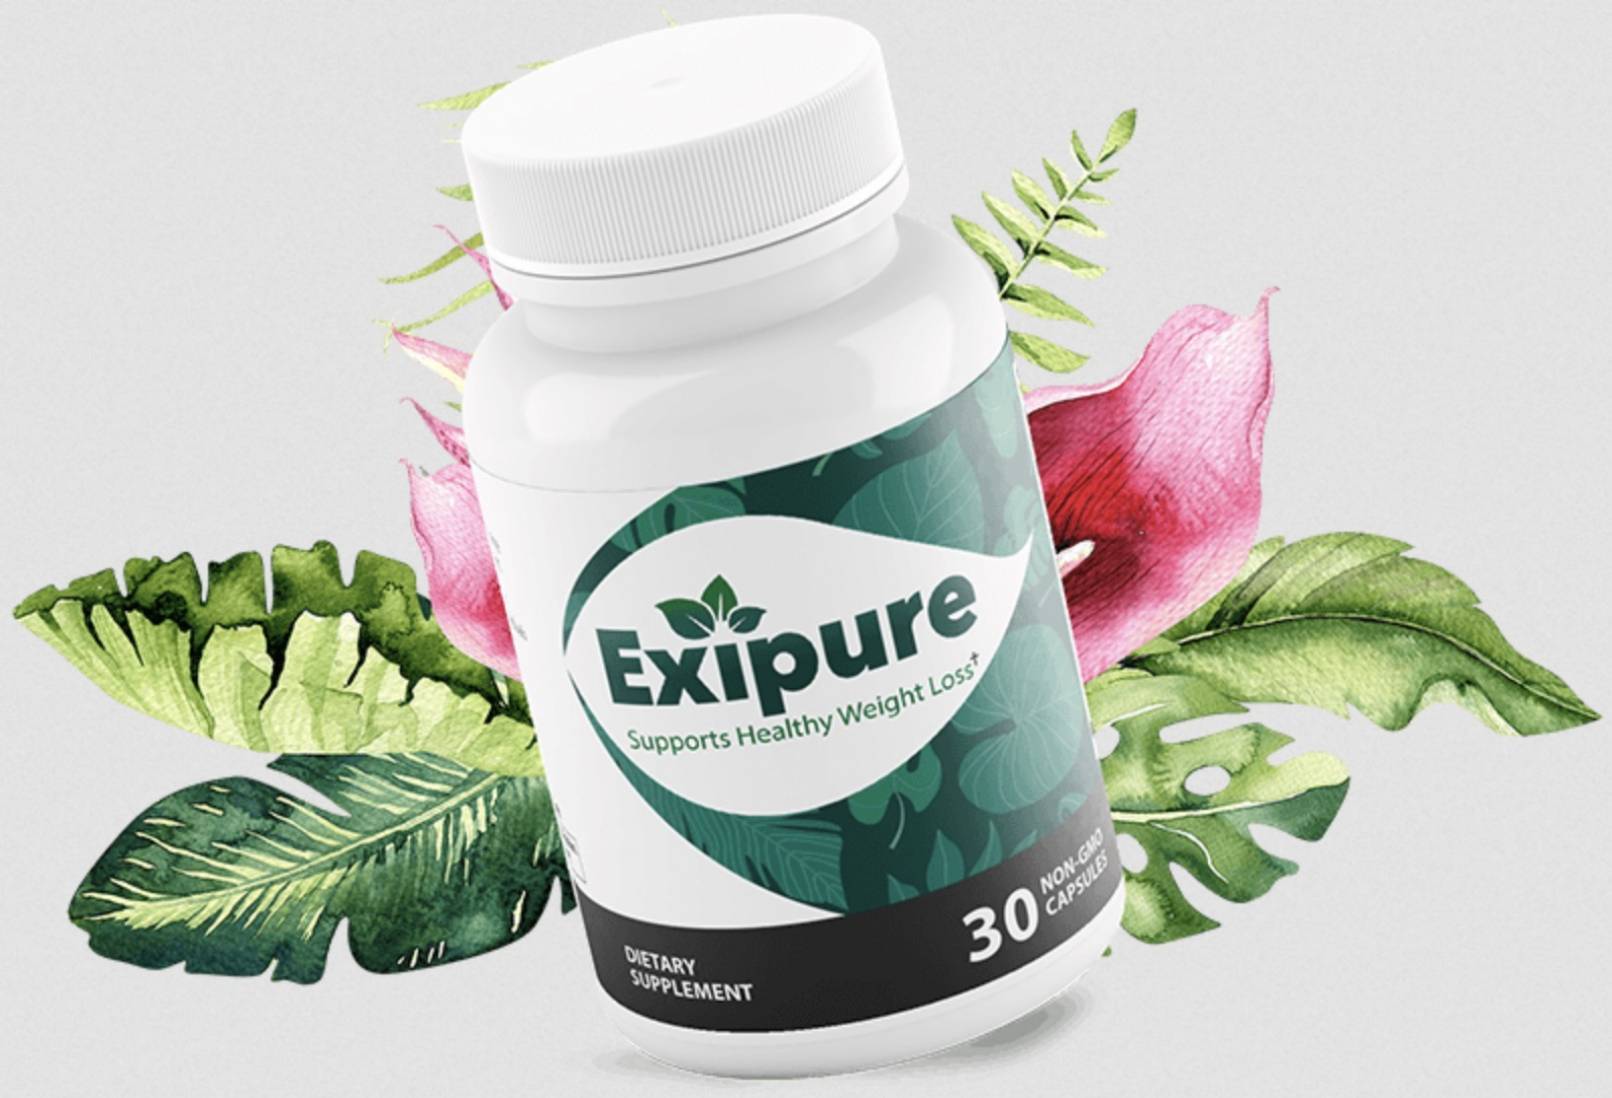 Results Of Exipure